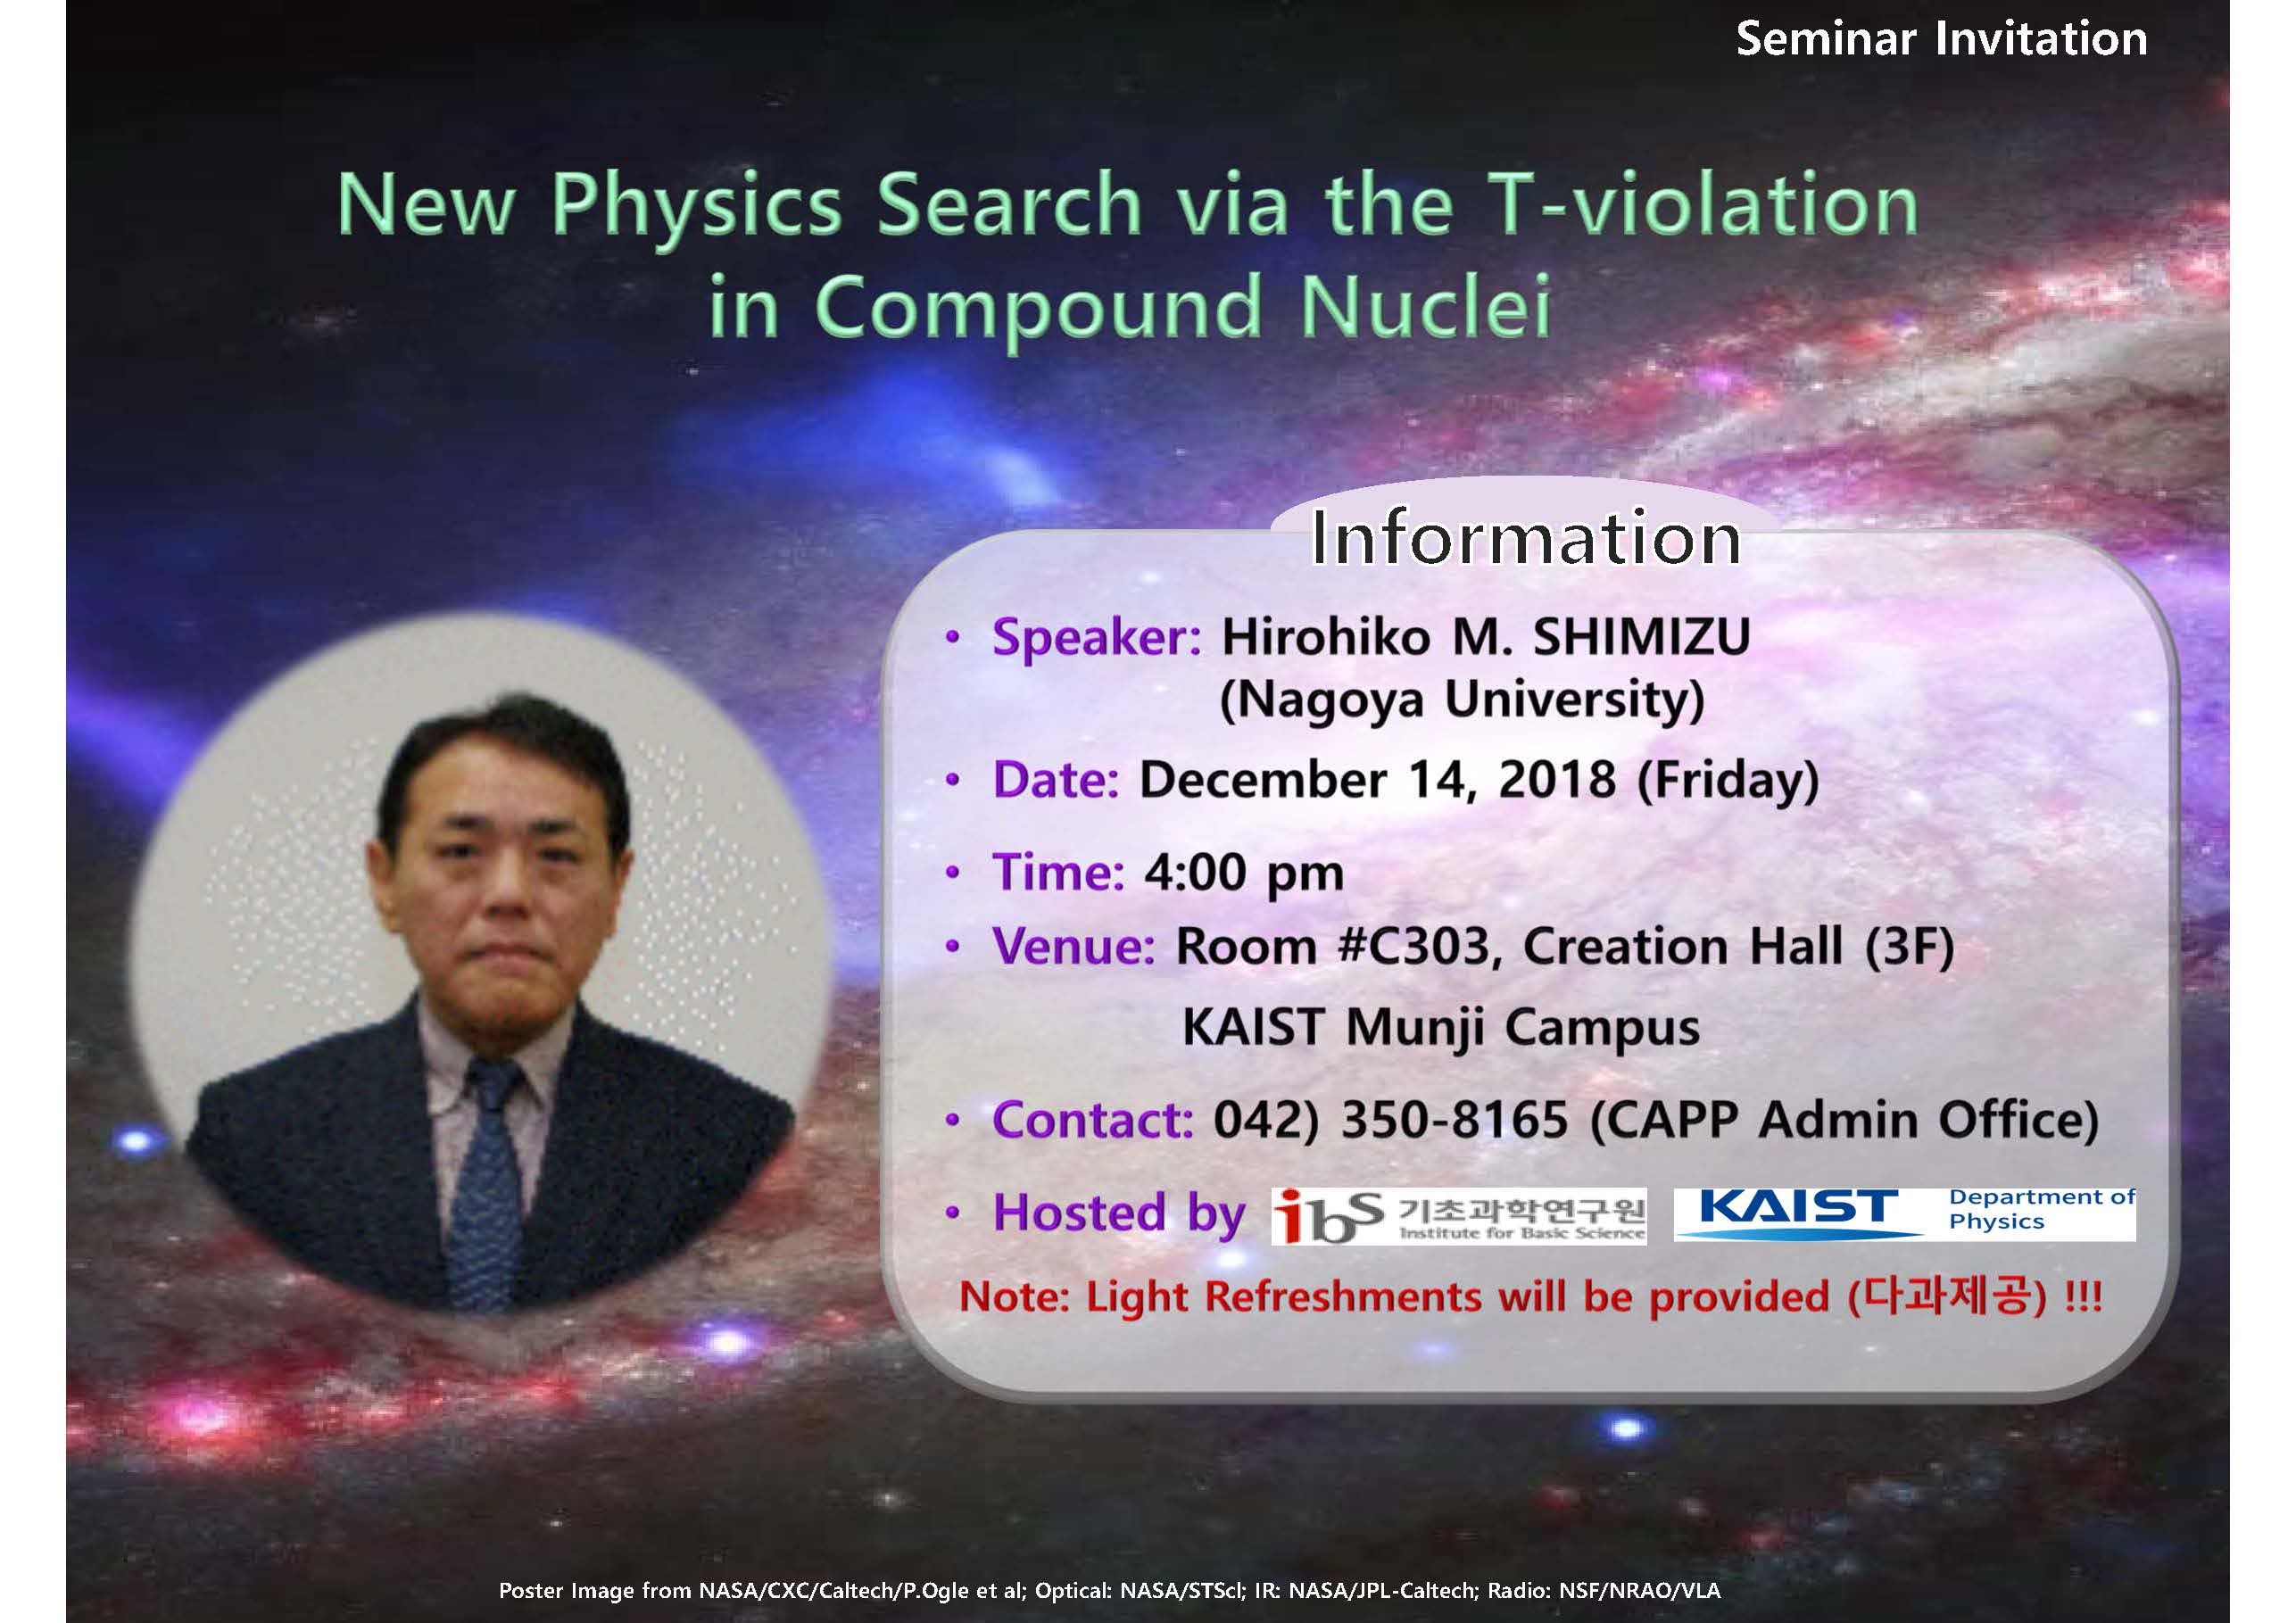 [CAPP 세미나] New Physics Search via the T-violation in Compound Nuclei